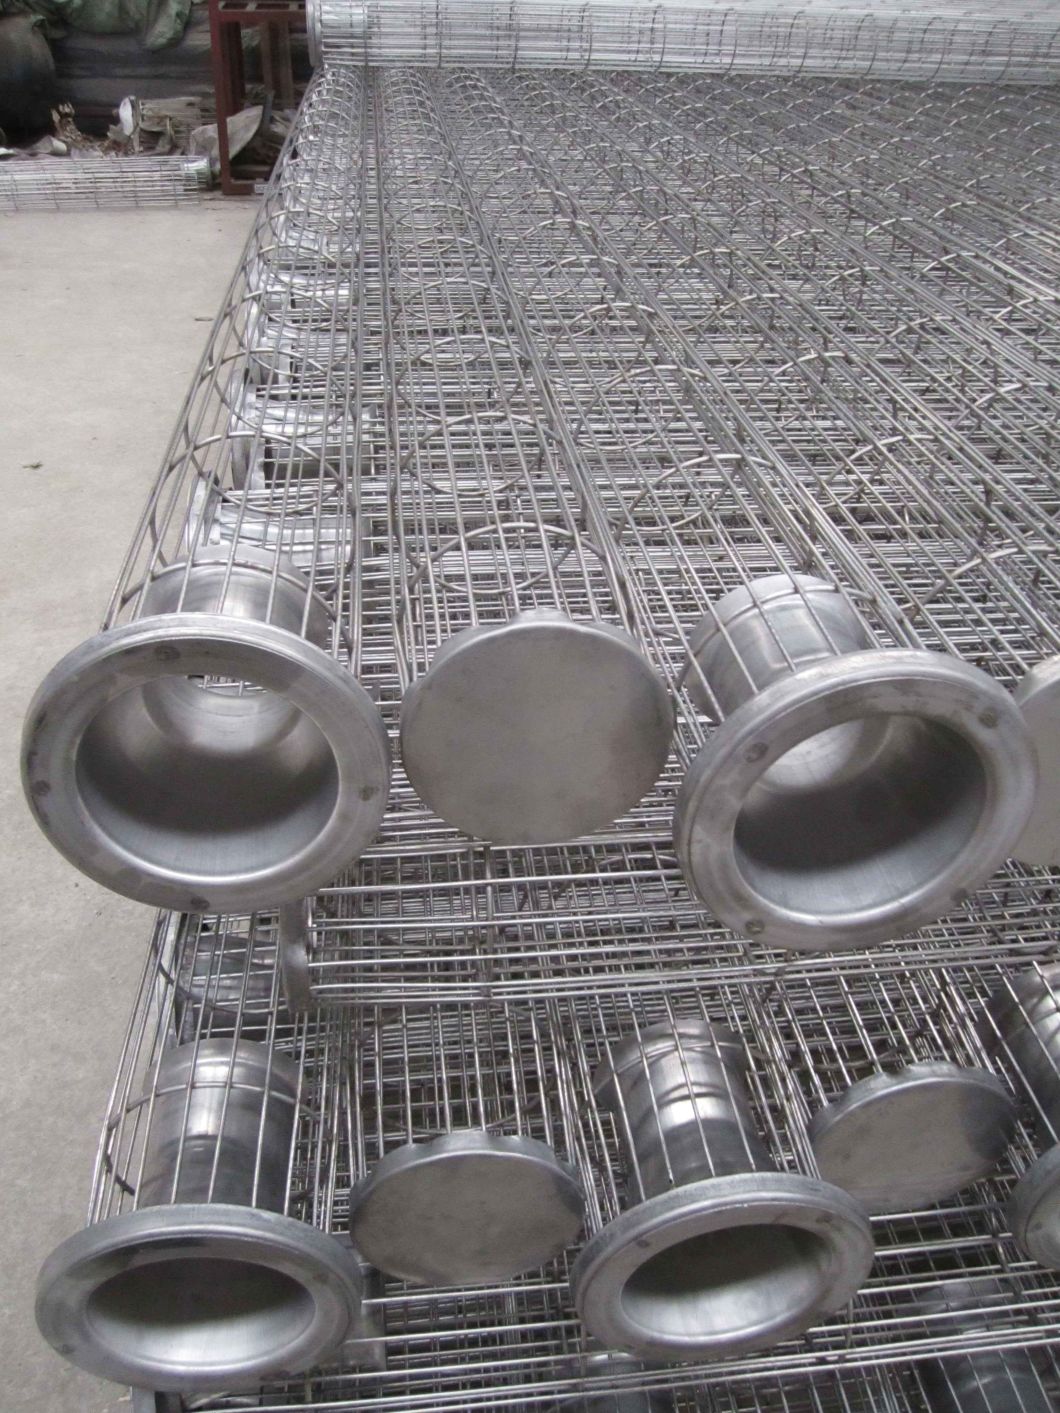 Carbon or Stainless Steel Cage Filter for Dust Filter Bag Since 1992